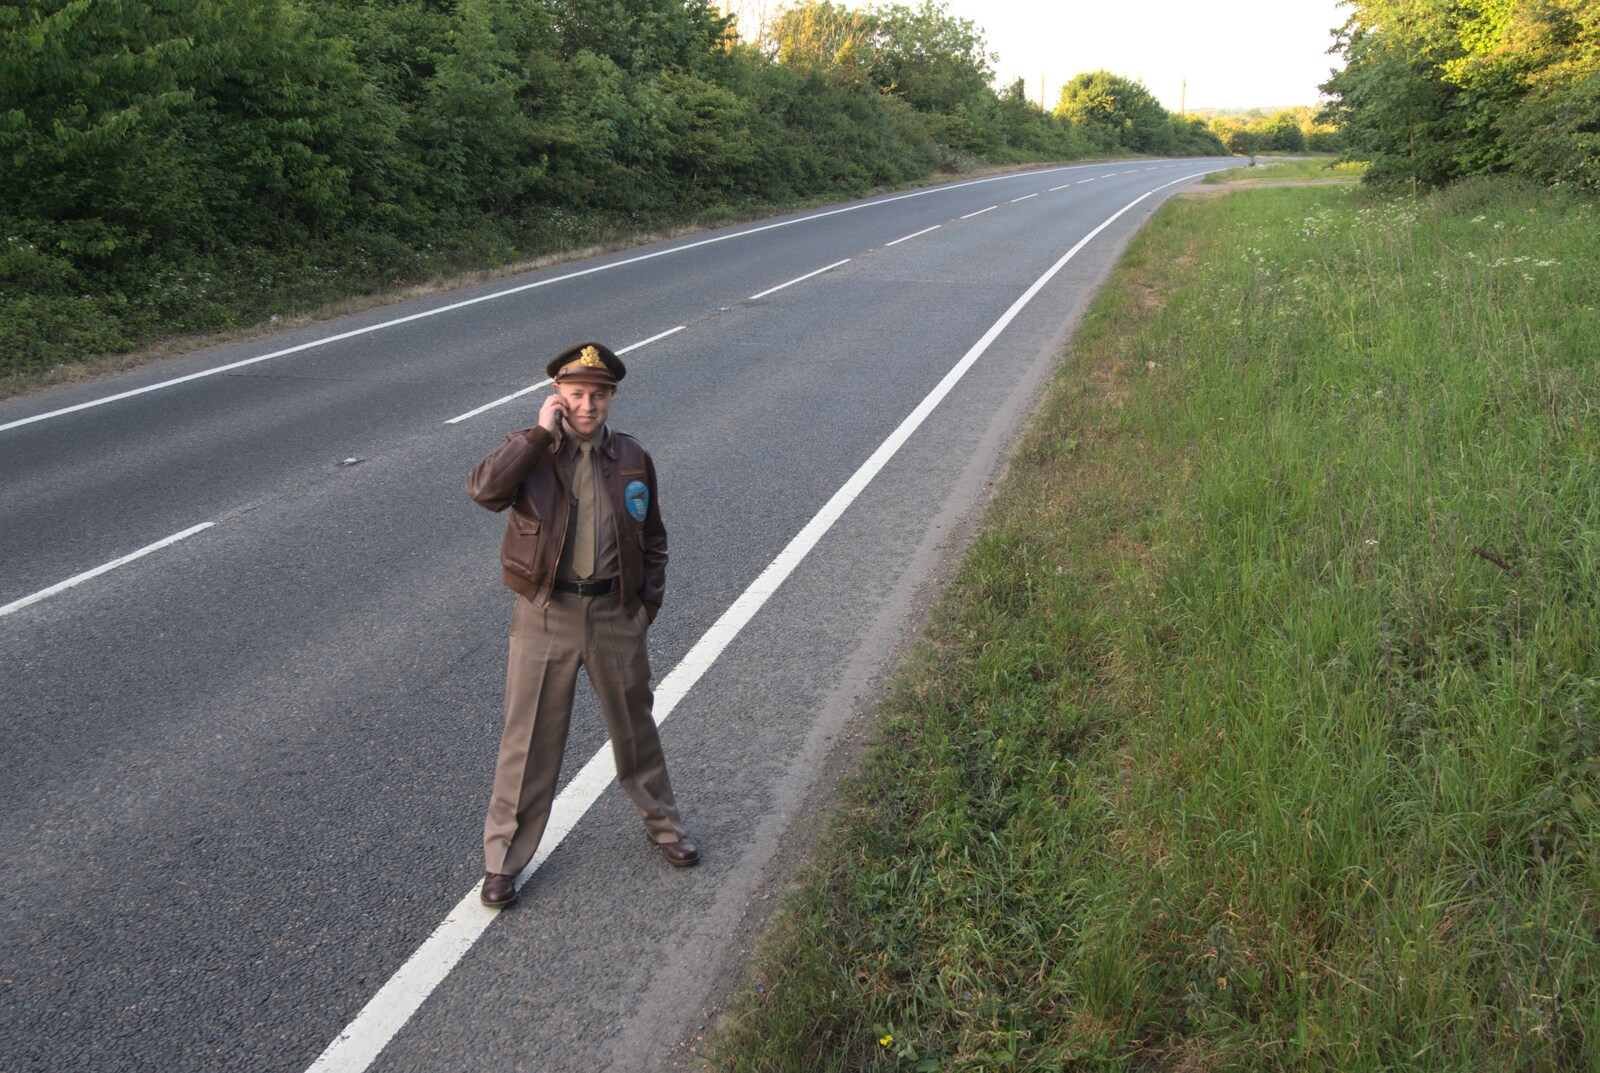 The Bressingham Blitz 1940s Dance, Bressingham Steam Museum, Norfolk - 21st May 2010: John makes a call to the AA on the A413 near Stuston